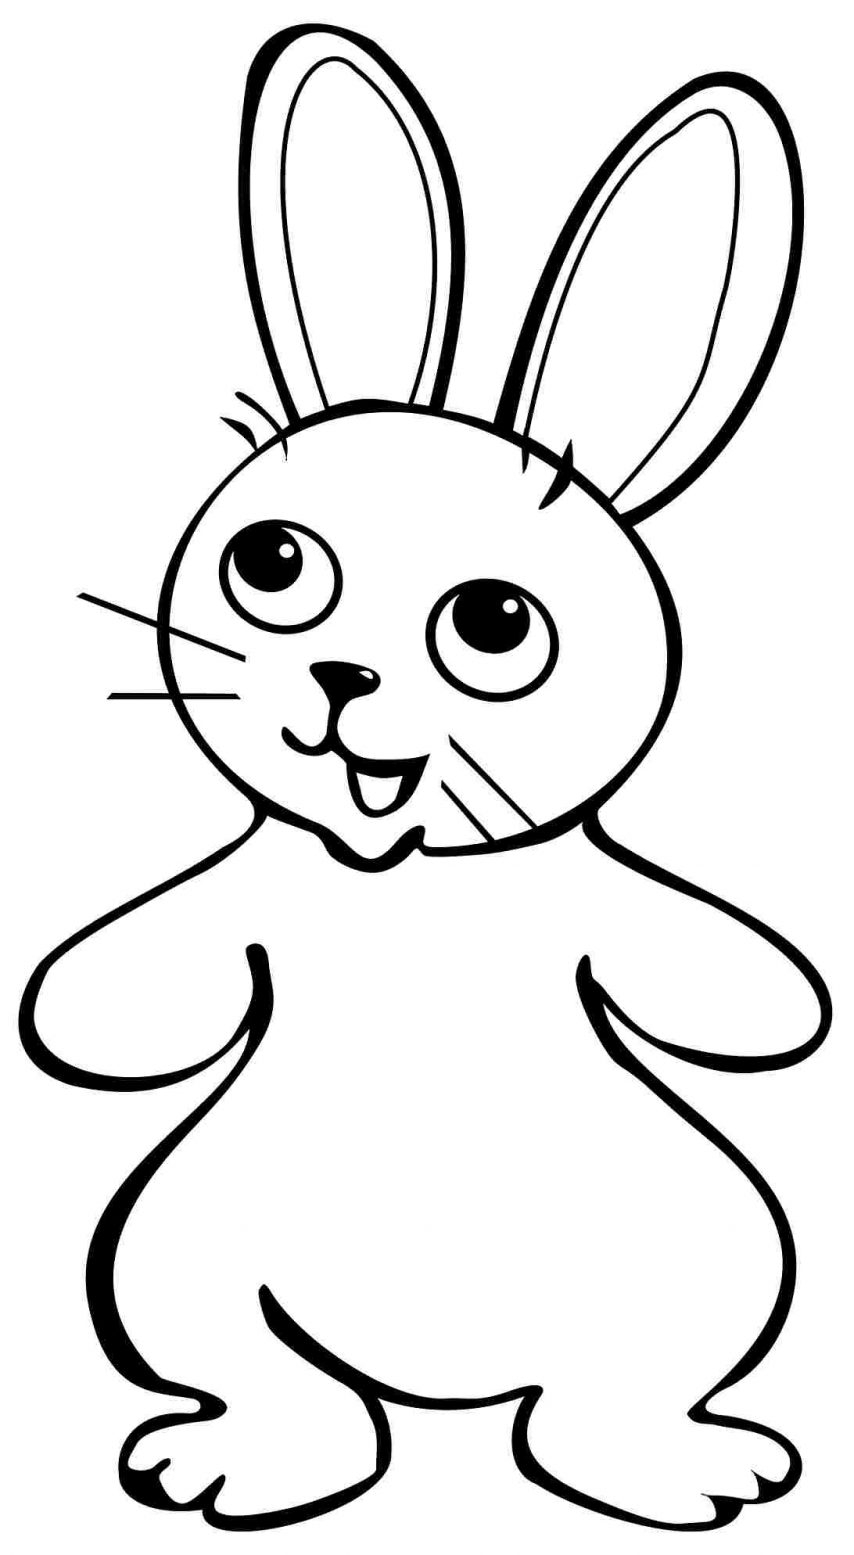 Free Printable Peter Rabbit Coloring Pages Rabbit Coloring Pages Free Download Best Rabbit Coloring Pages On